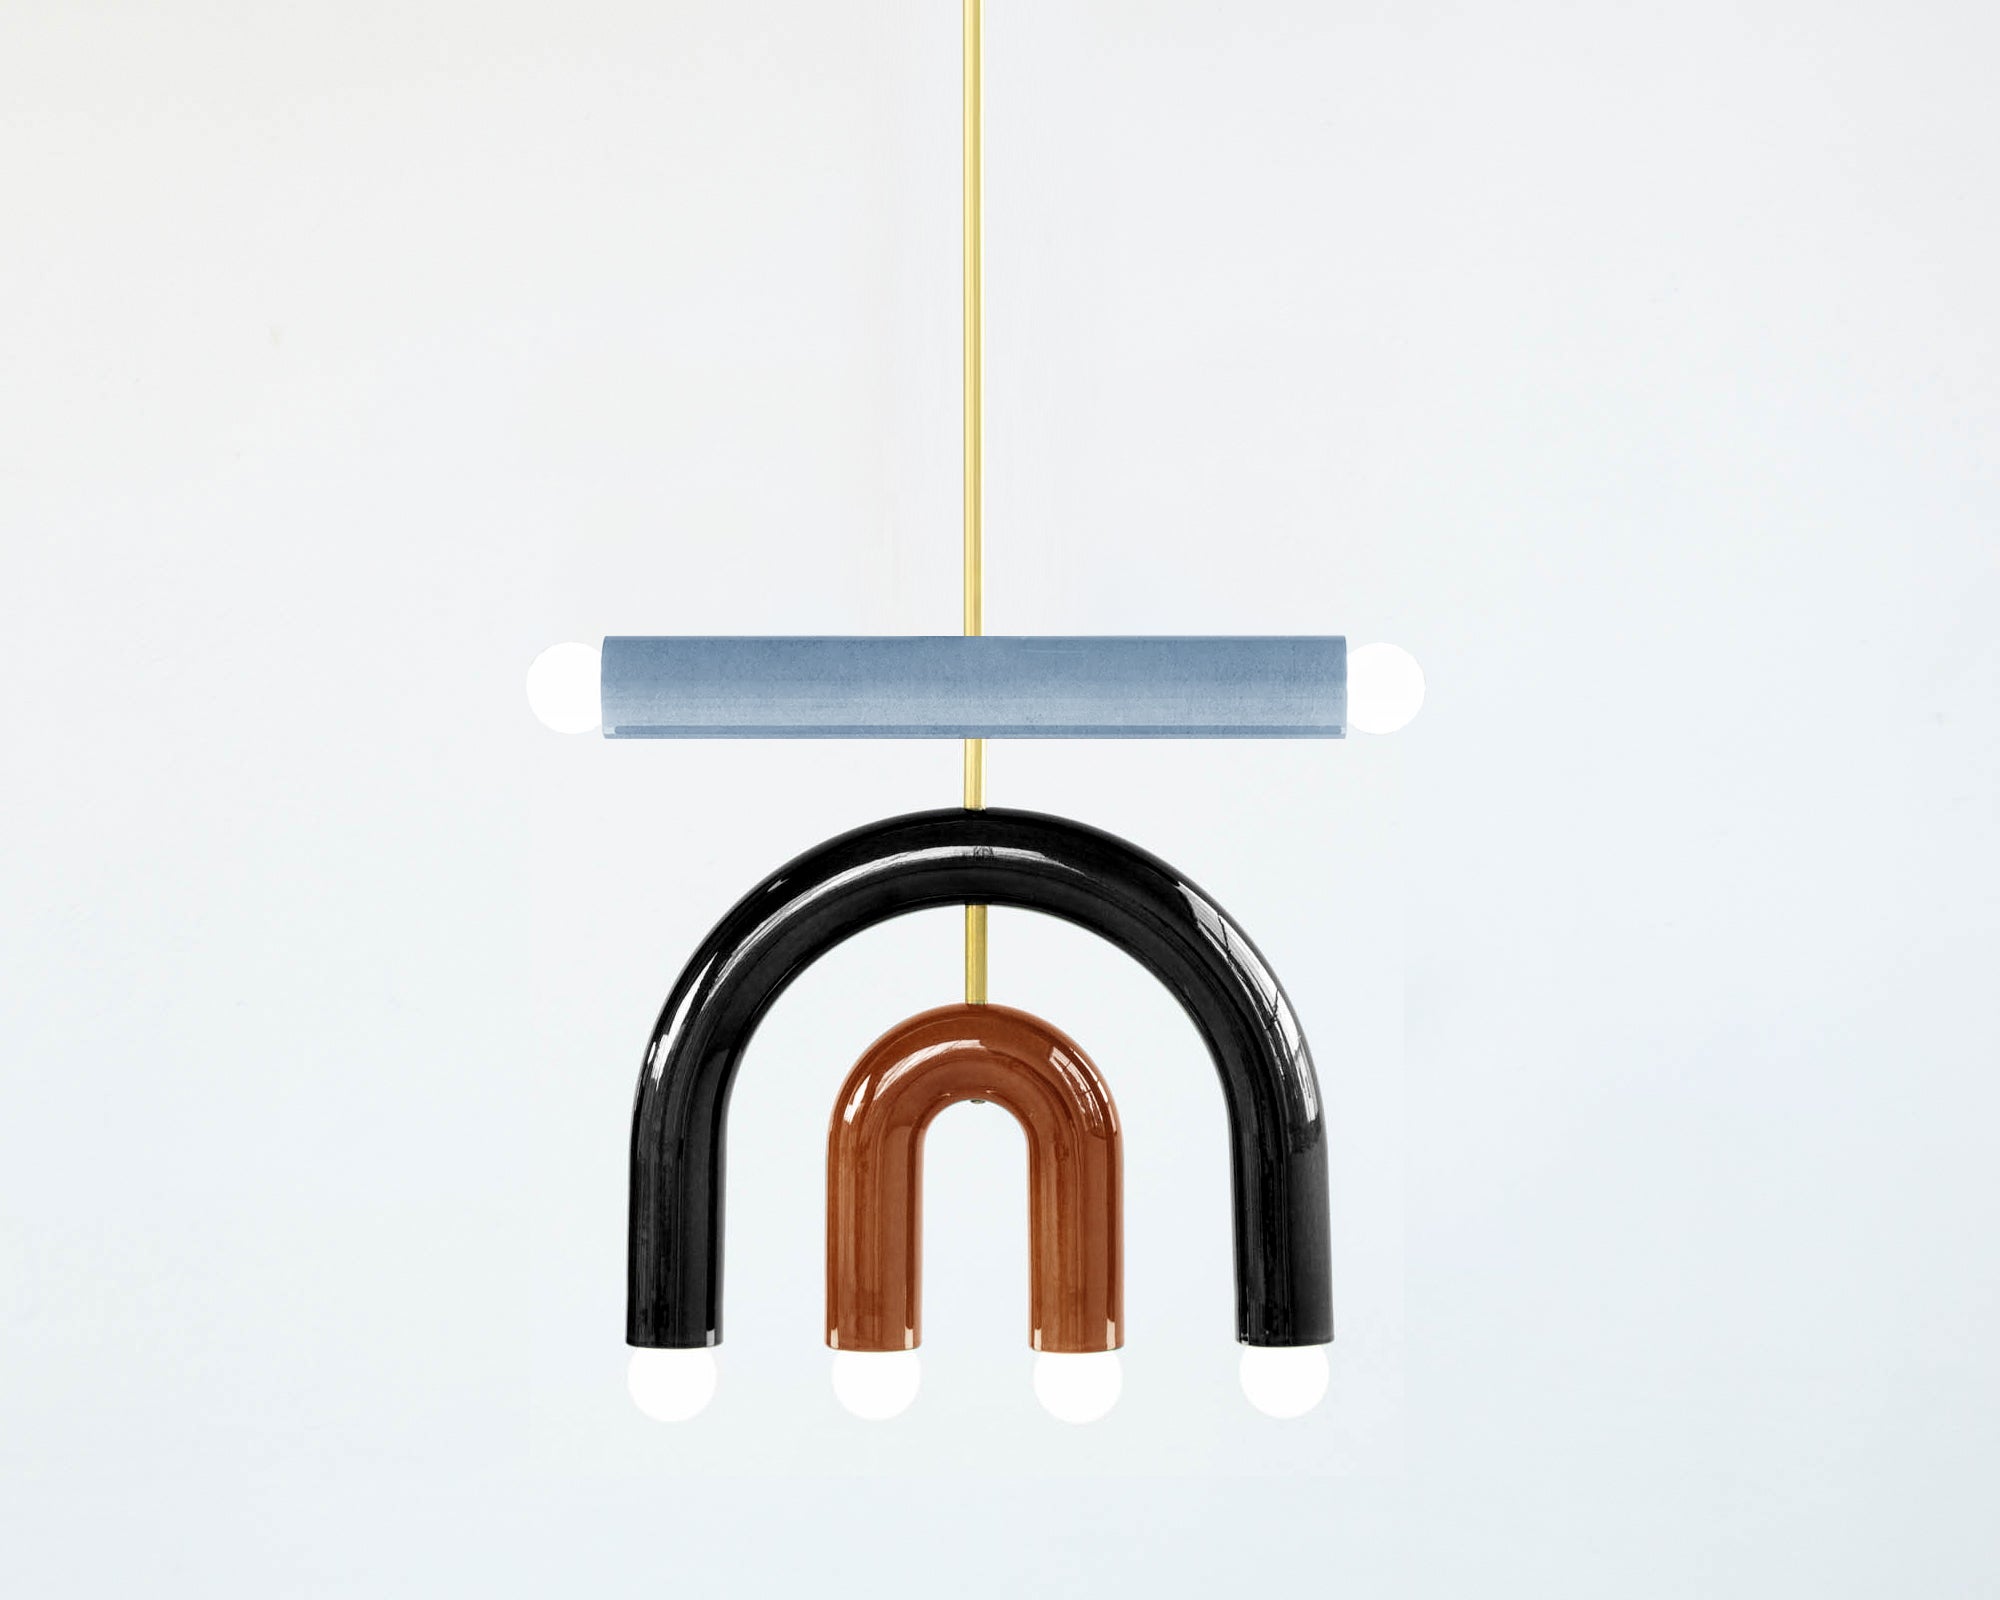 Ceramic Pendant Lamp TRN D1 BY Pani Jurek, Brass Rod, Blue and Ochre In New Condition For Sale In Paris, FR